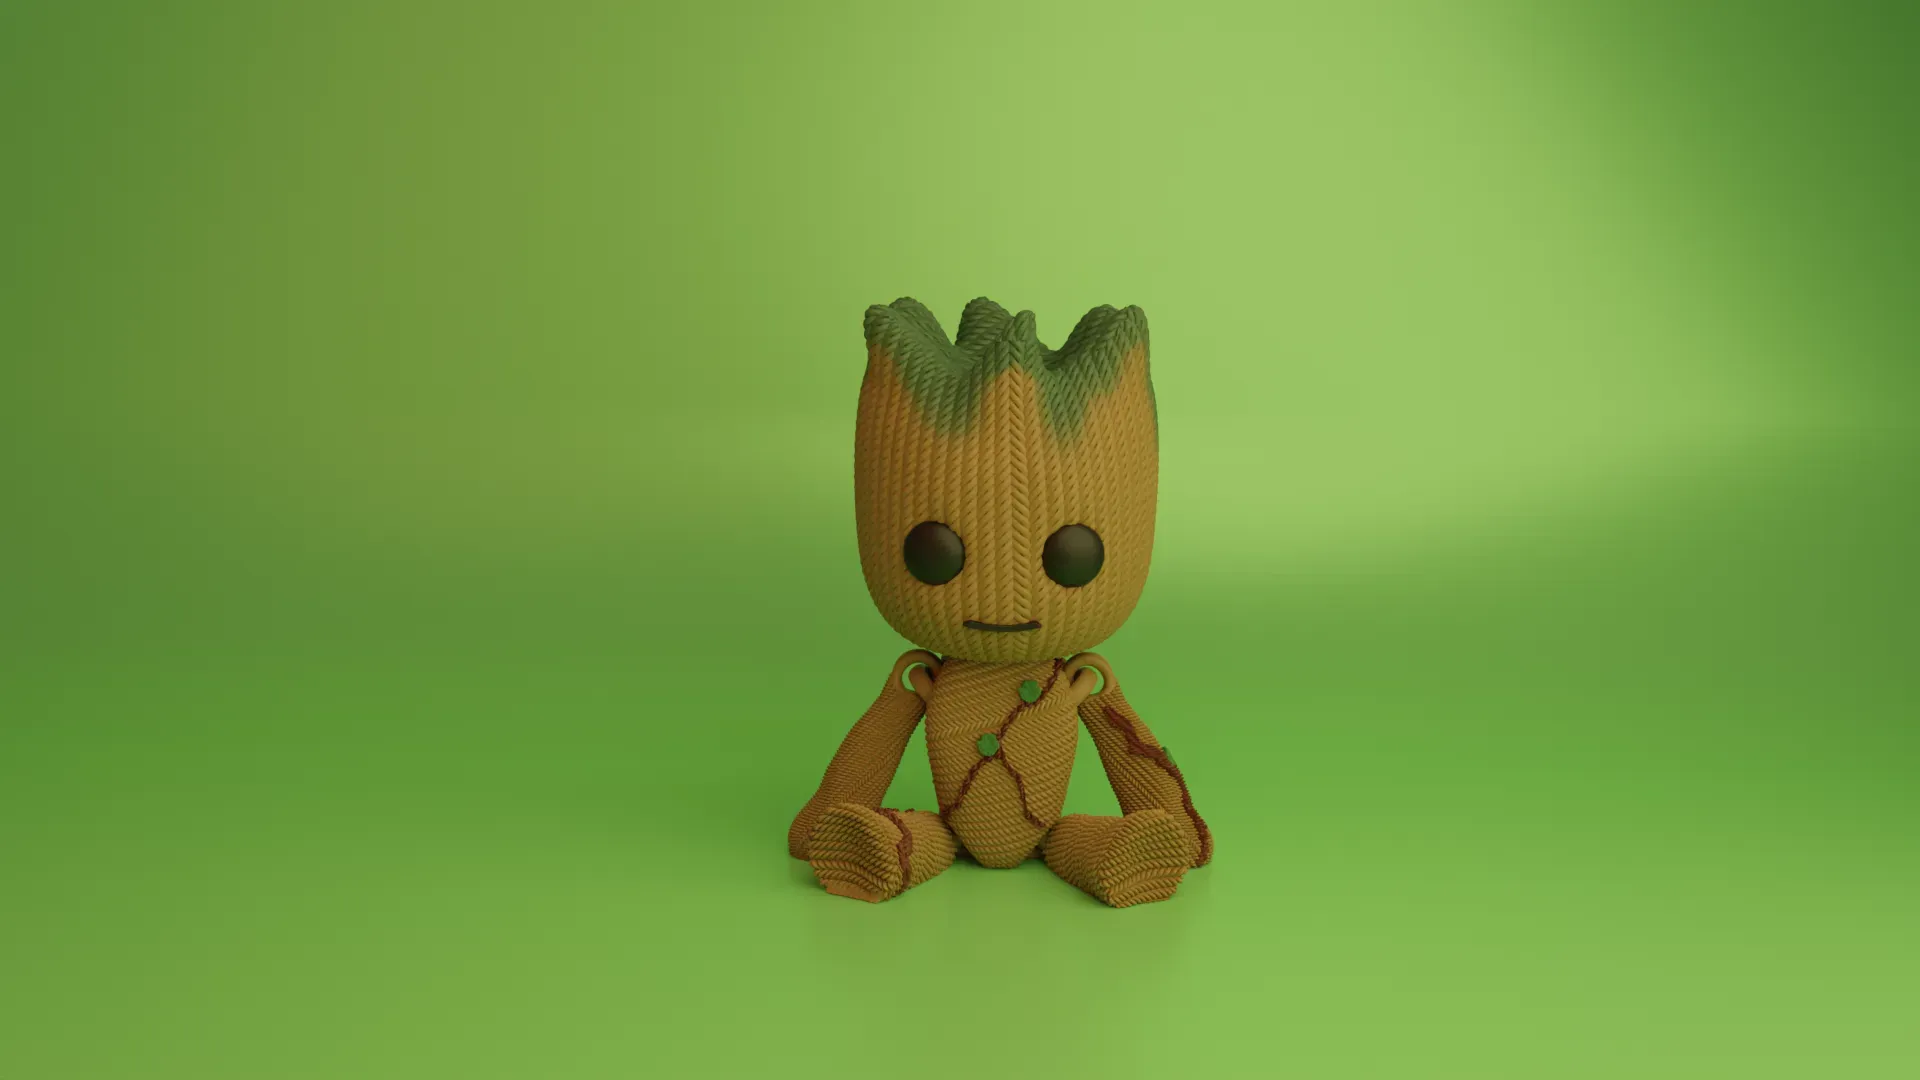 Crochet Knitted Articulated Groot